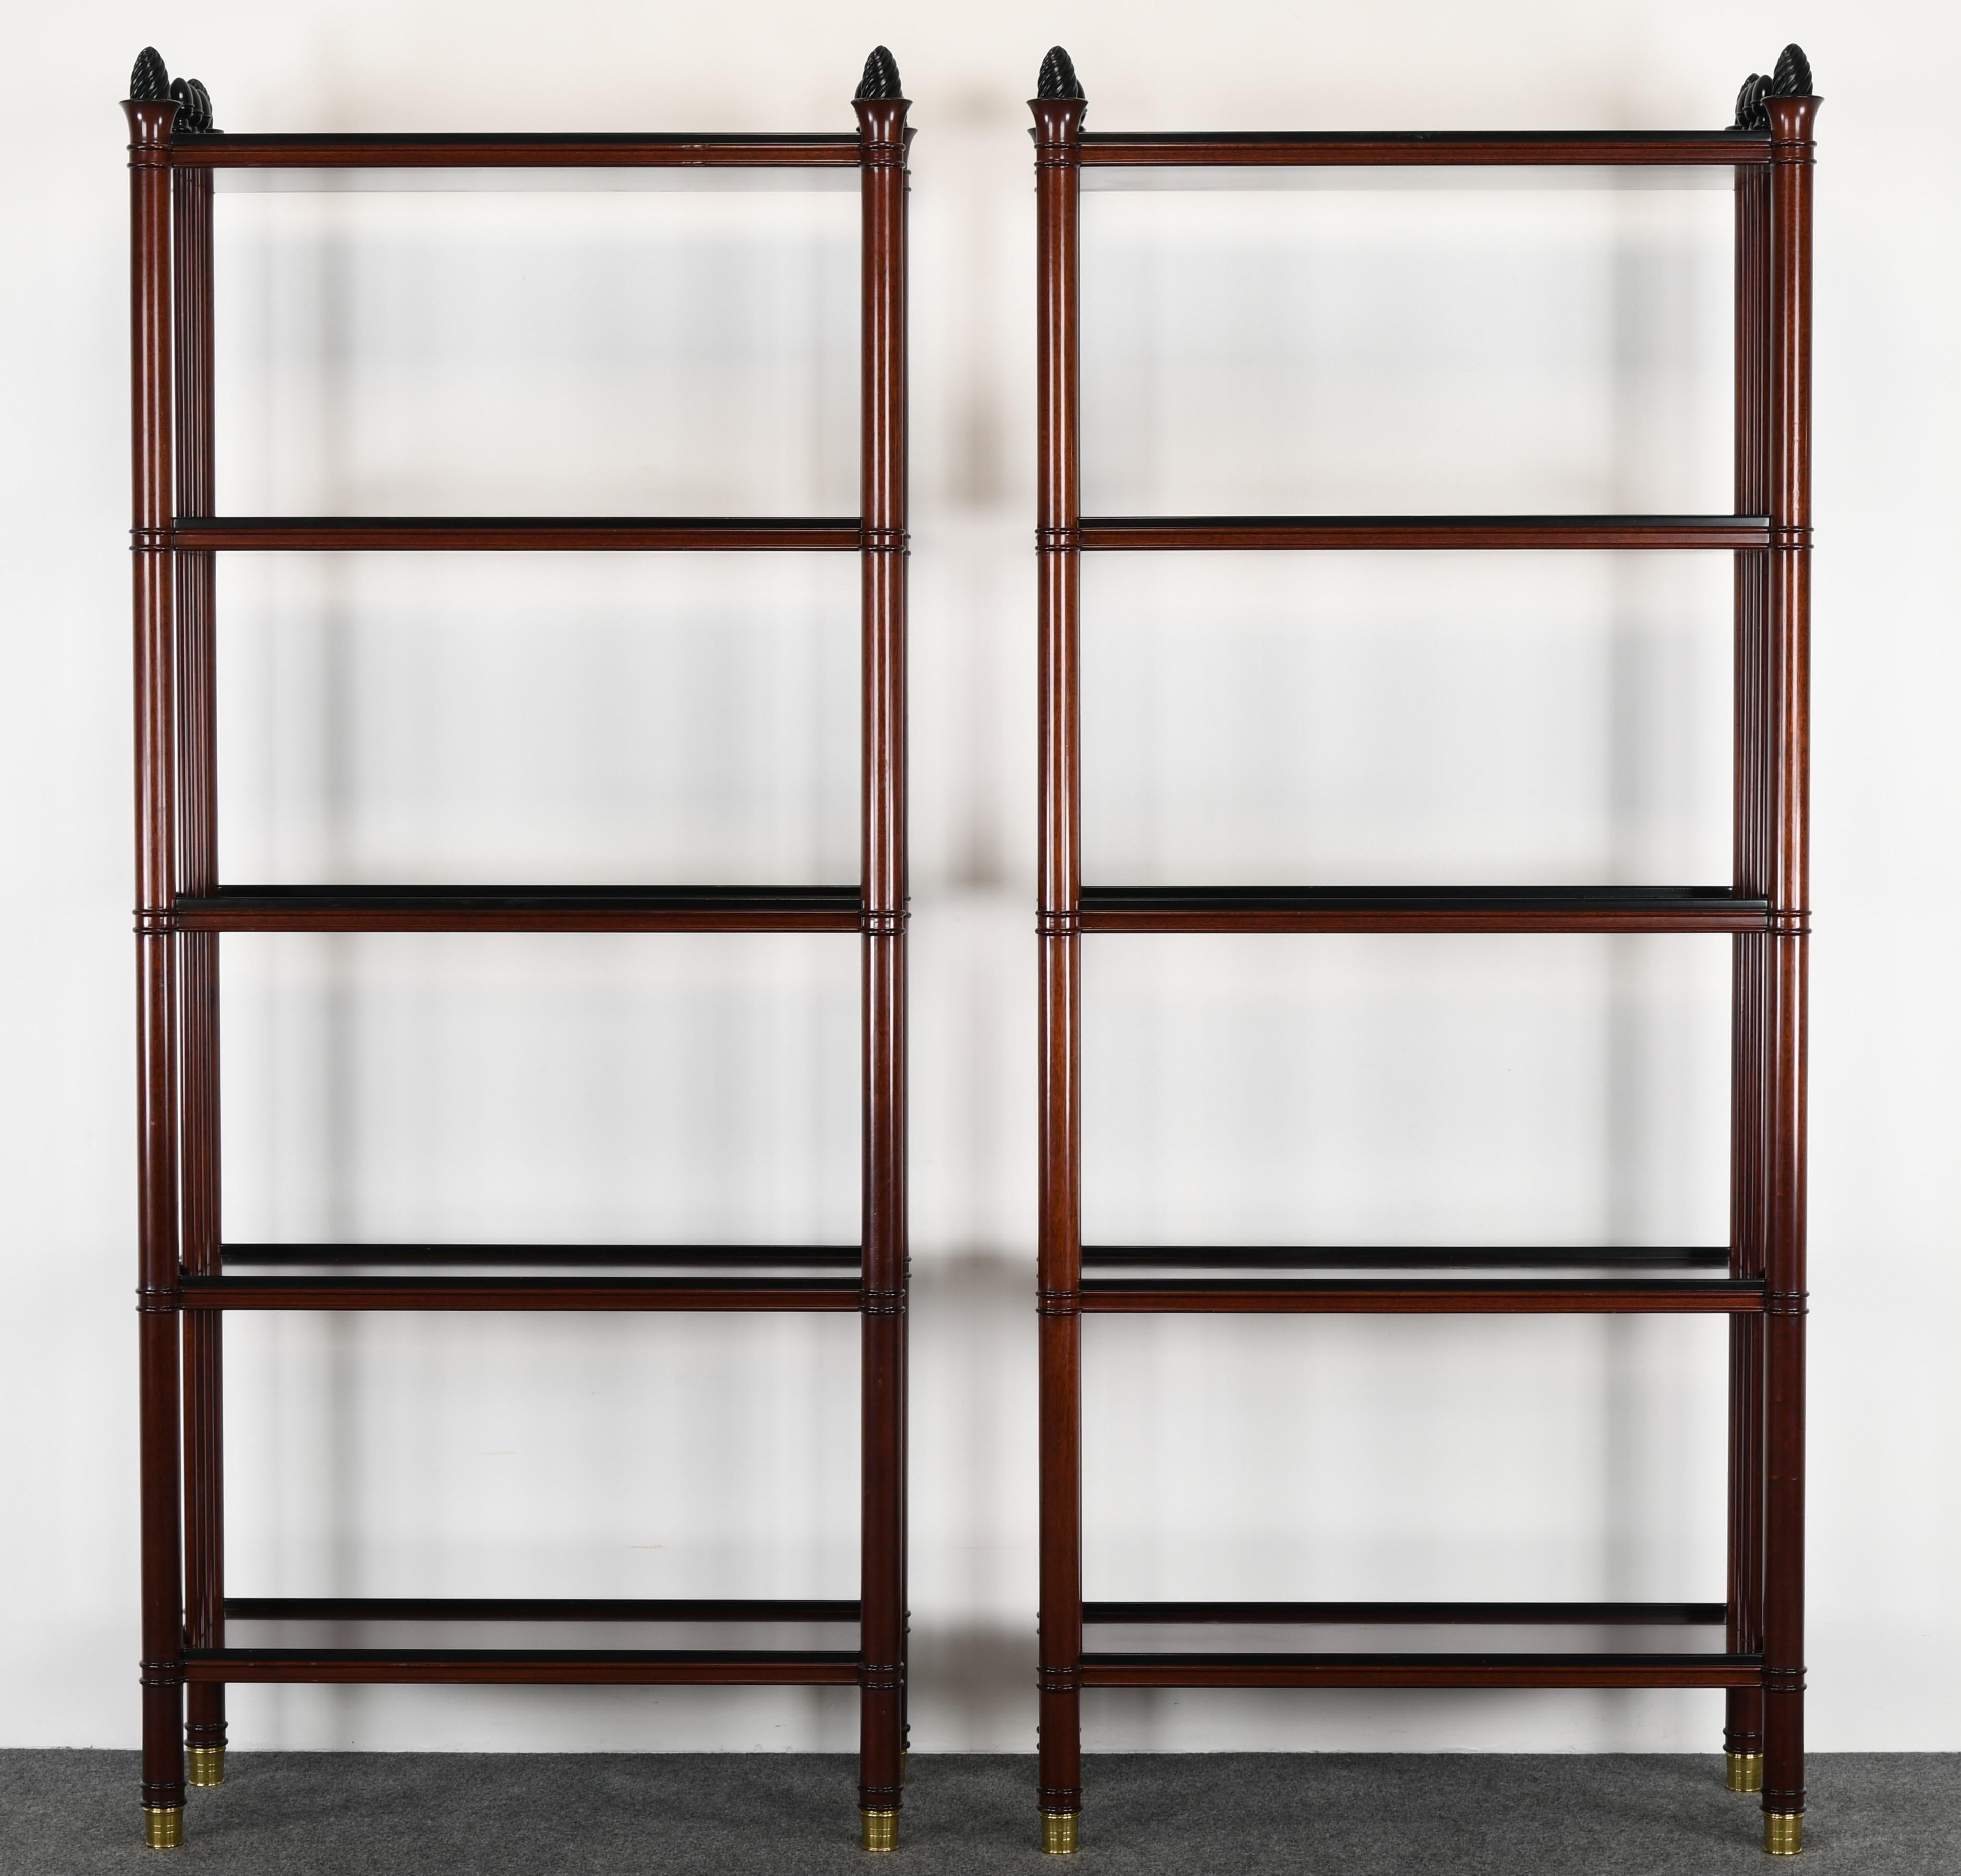 A fine pair of étagères or bookshelves by Peter Marino. Signed underside on the label 